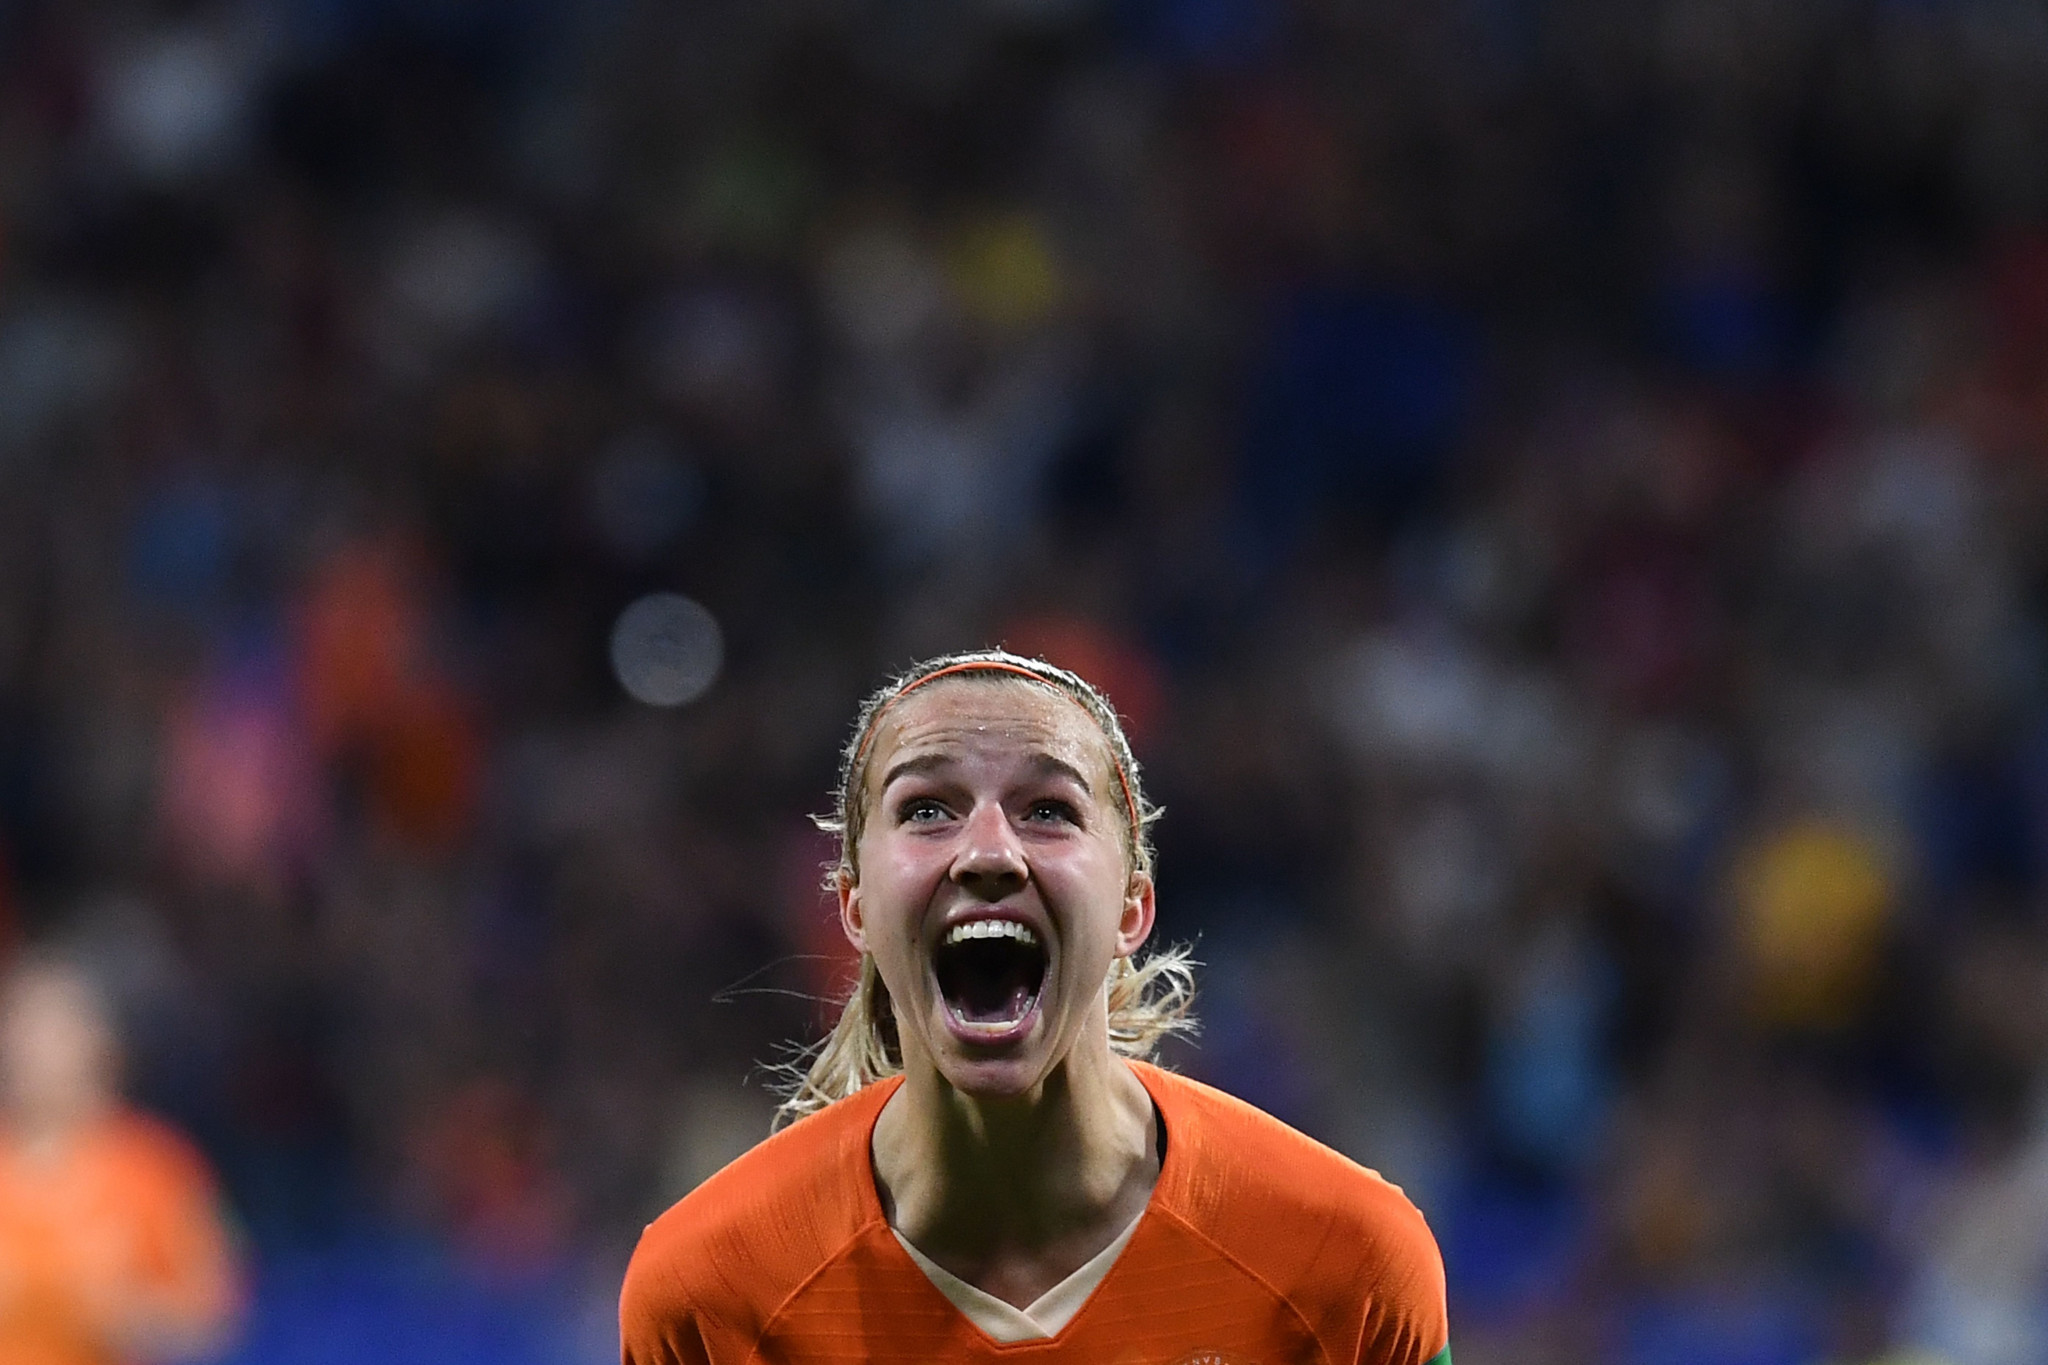 Netherlands edge out Sweden to reach FIFA Women's World Cup final